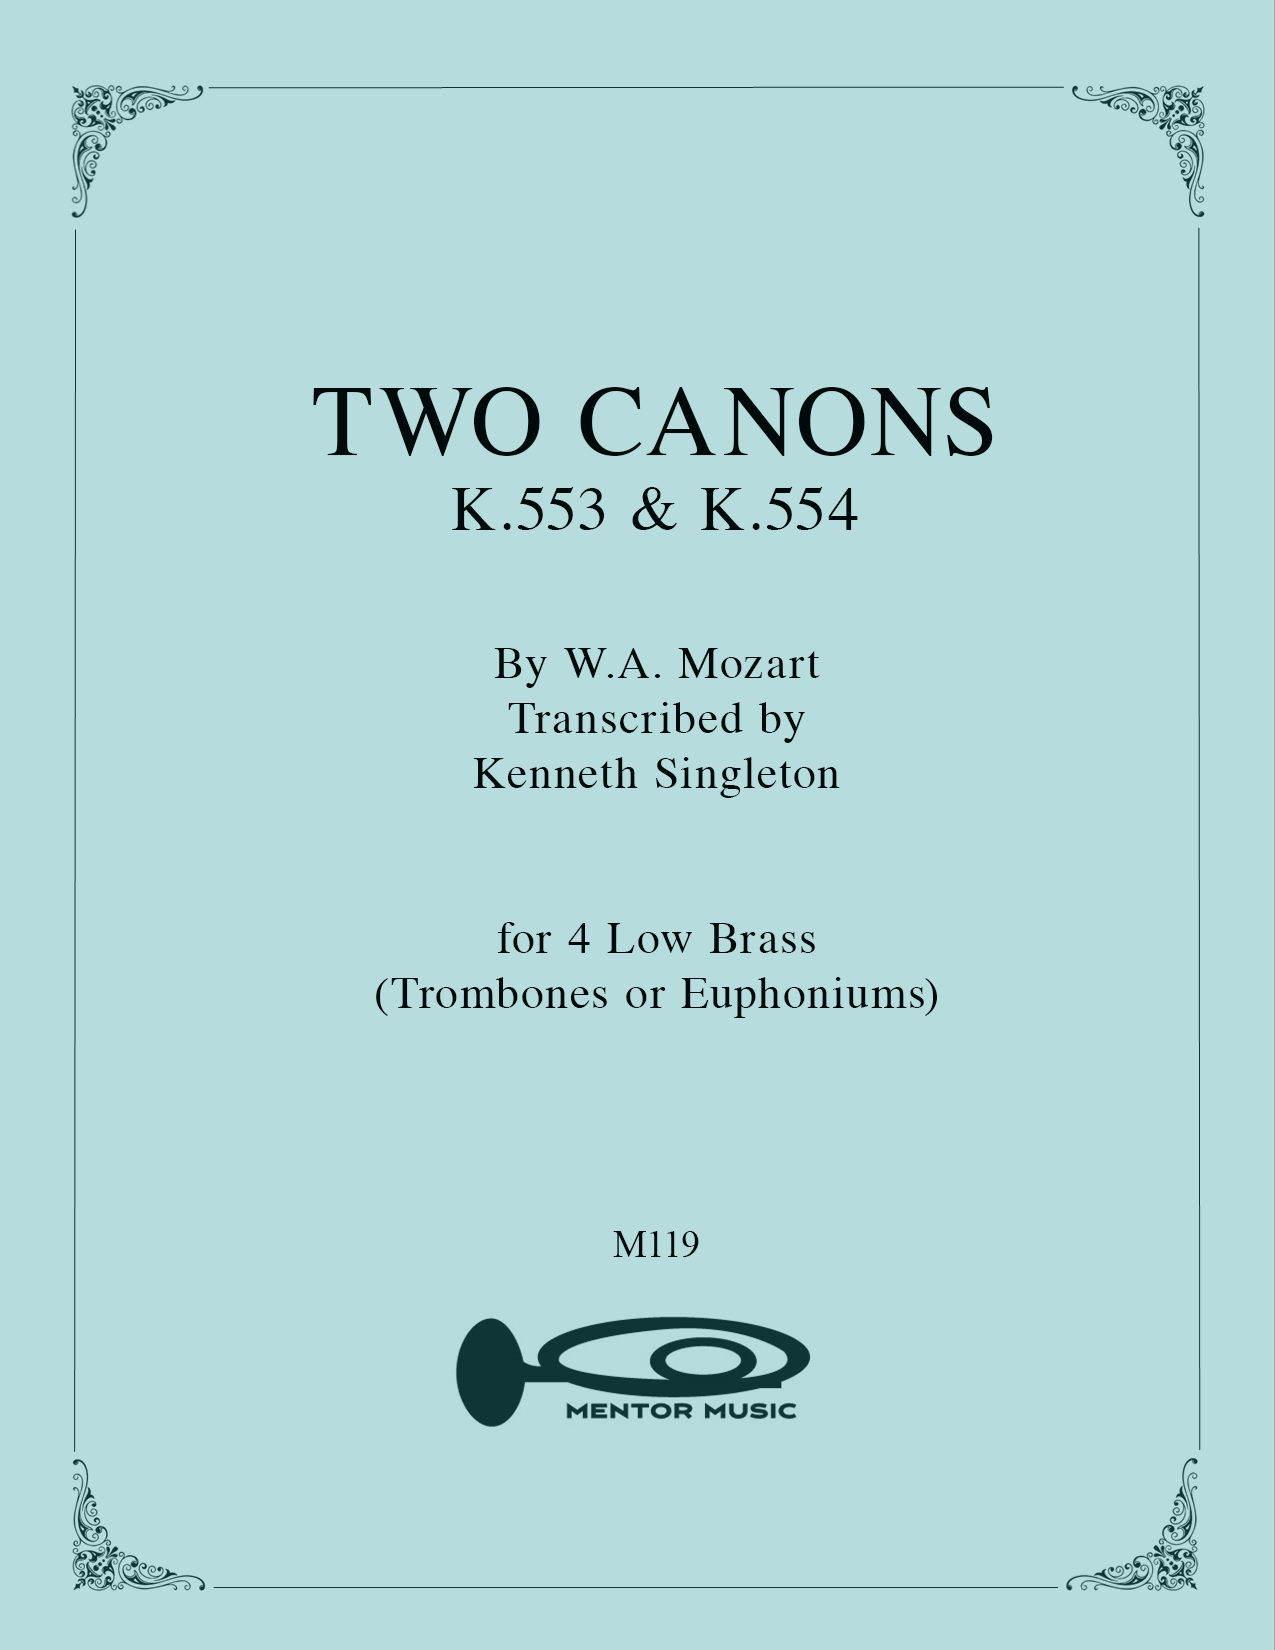 Two Mozart Canons for 4 Low Brass